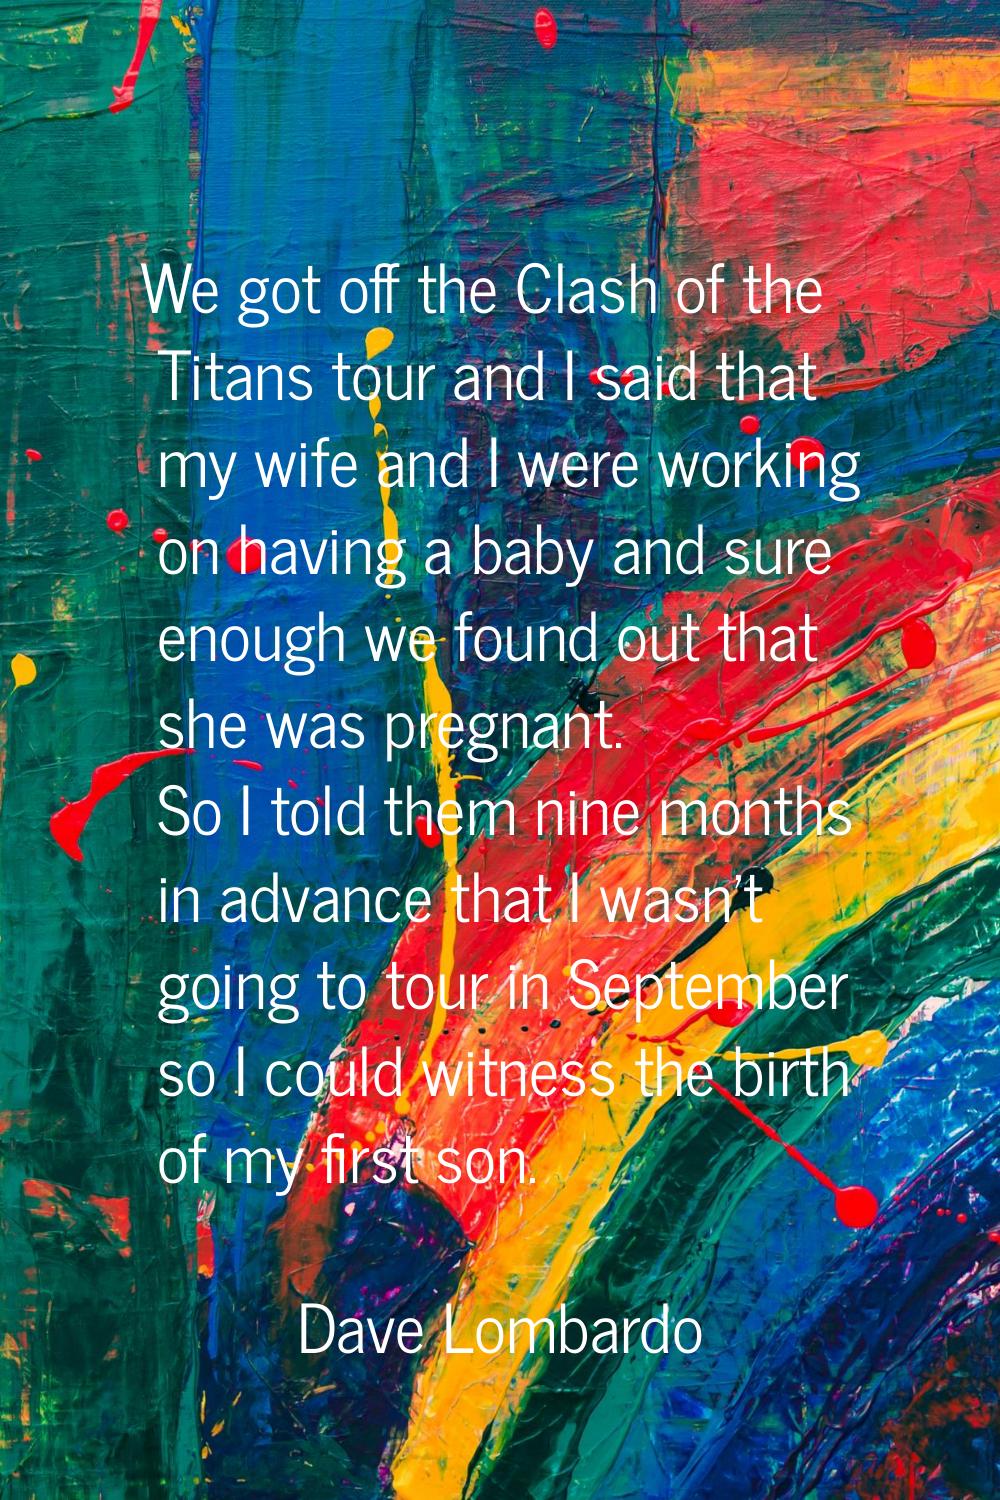 We got off the Clash of the Titans tour and I said that my wife and I were working on having a baby